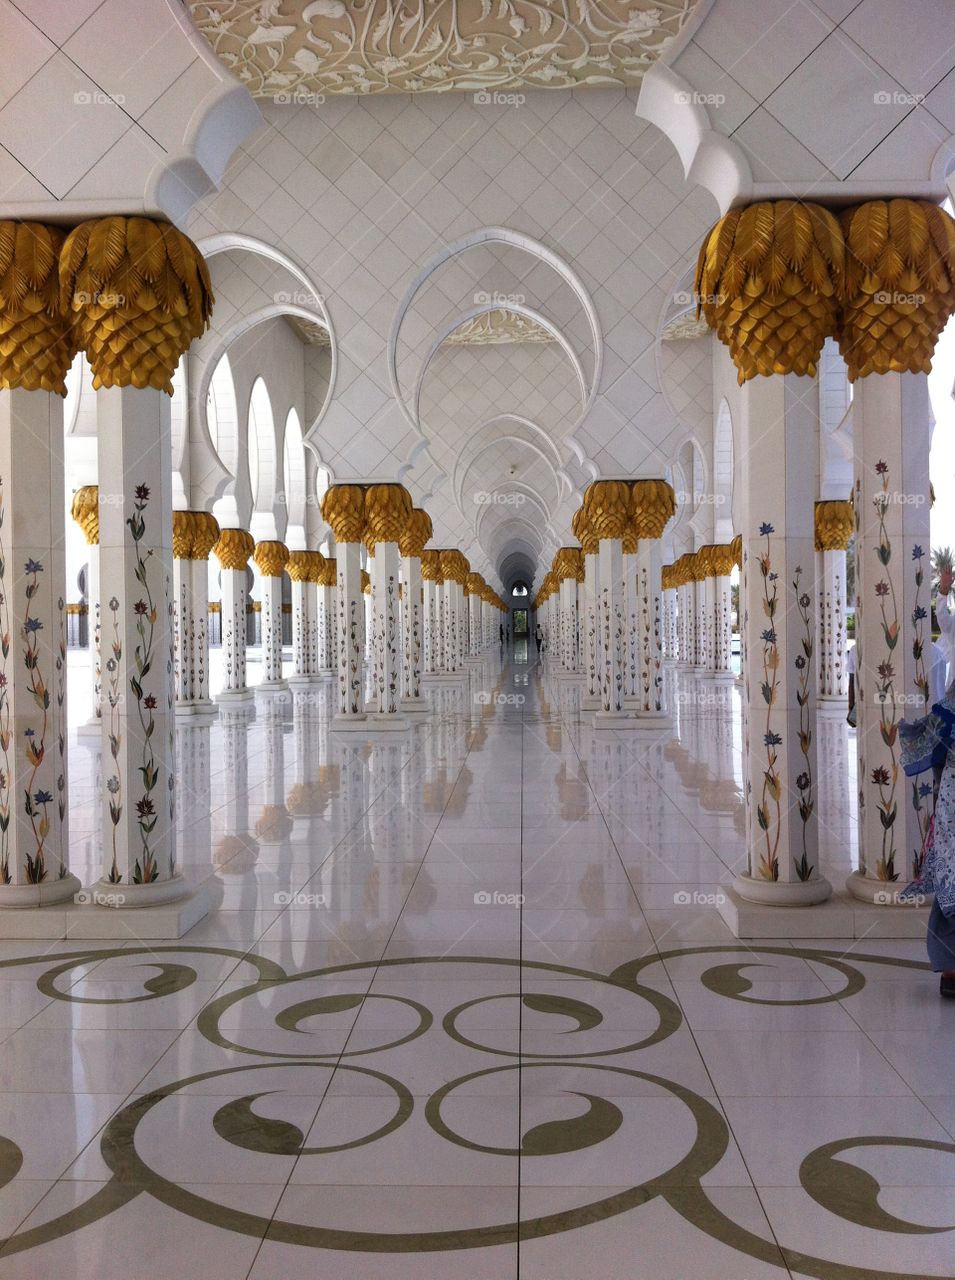 Gold While & Marble Walkway 